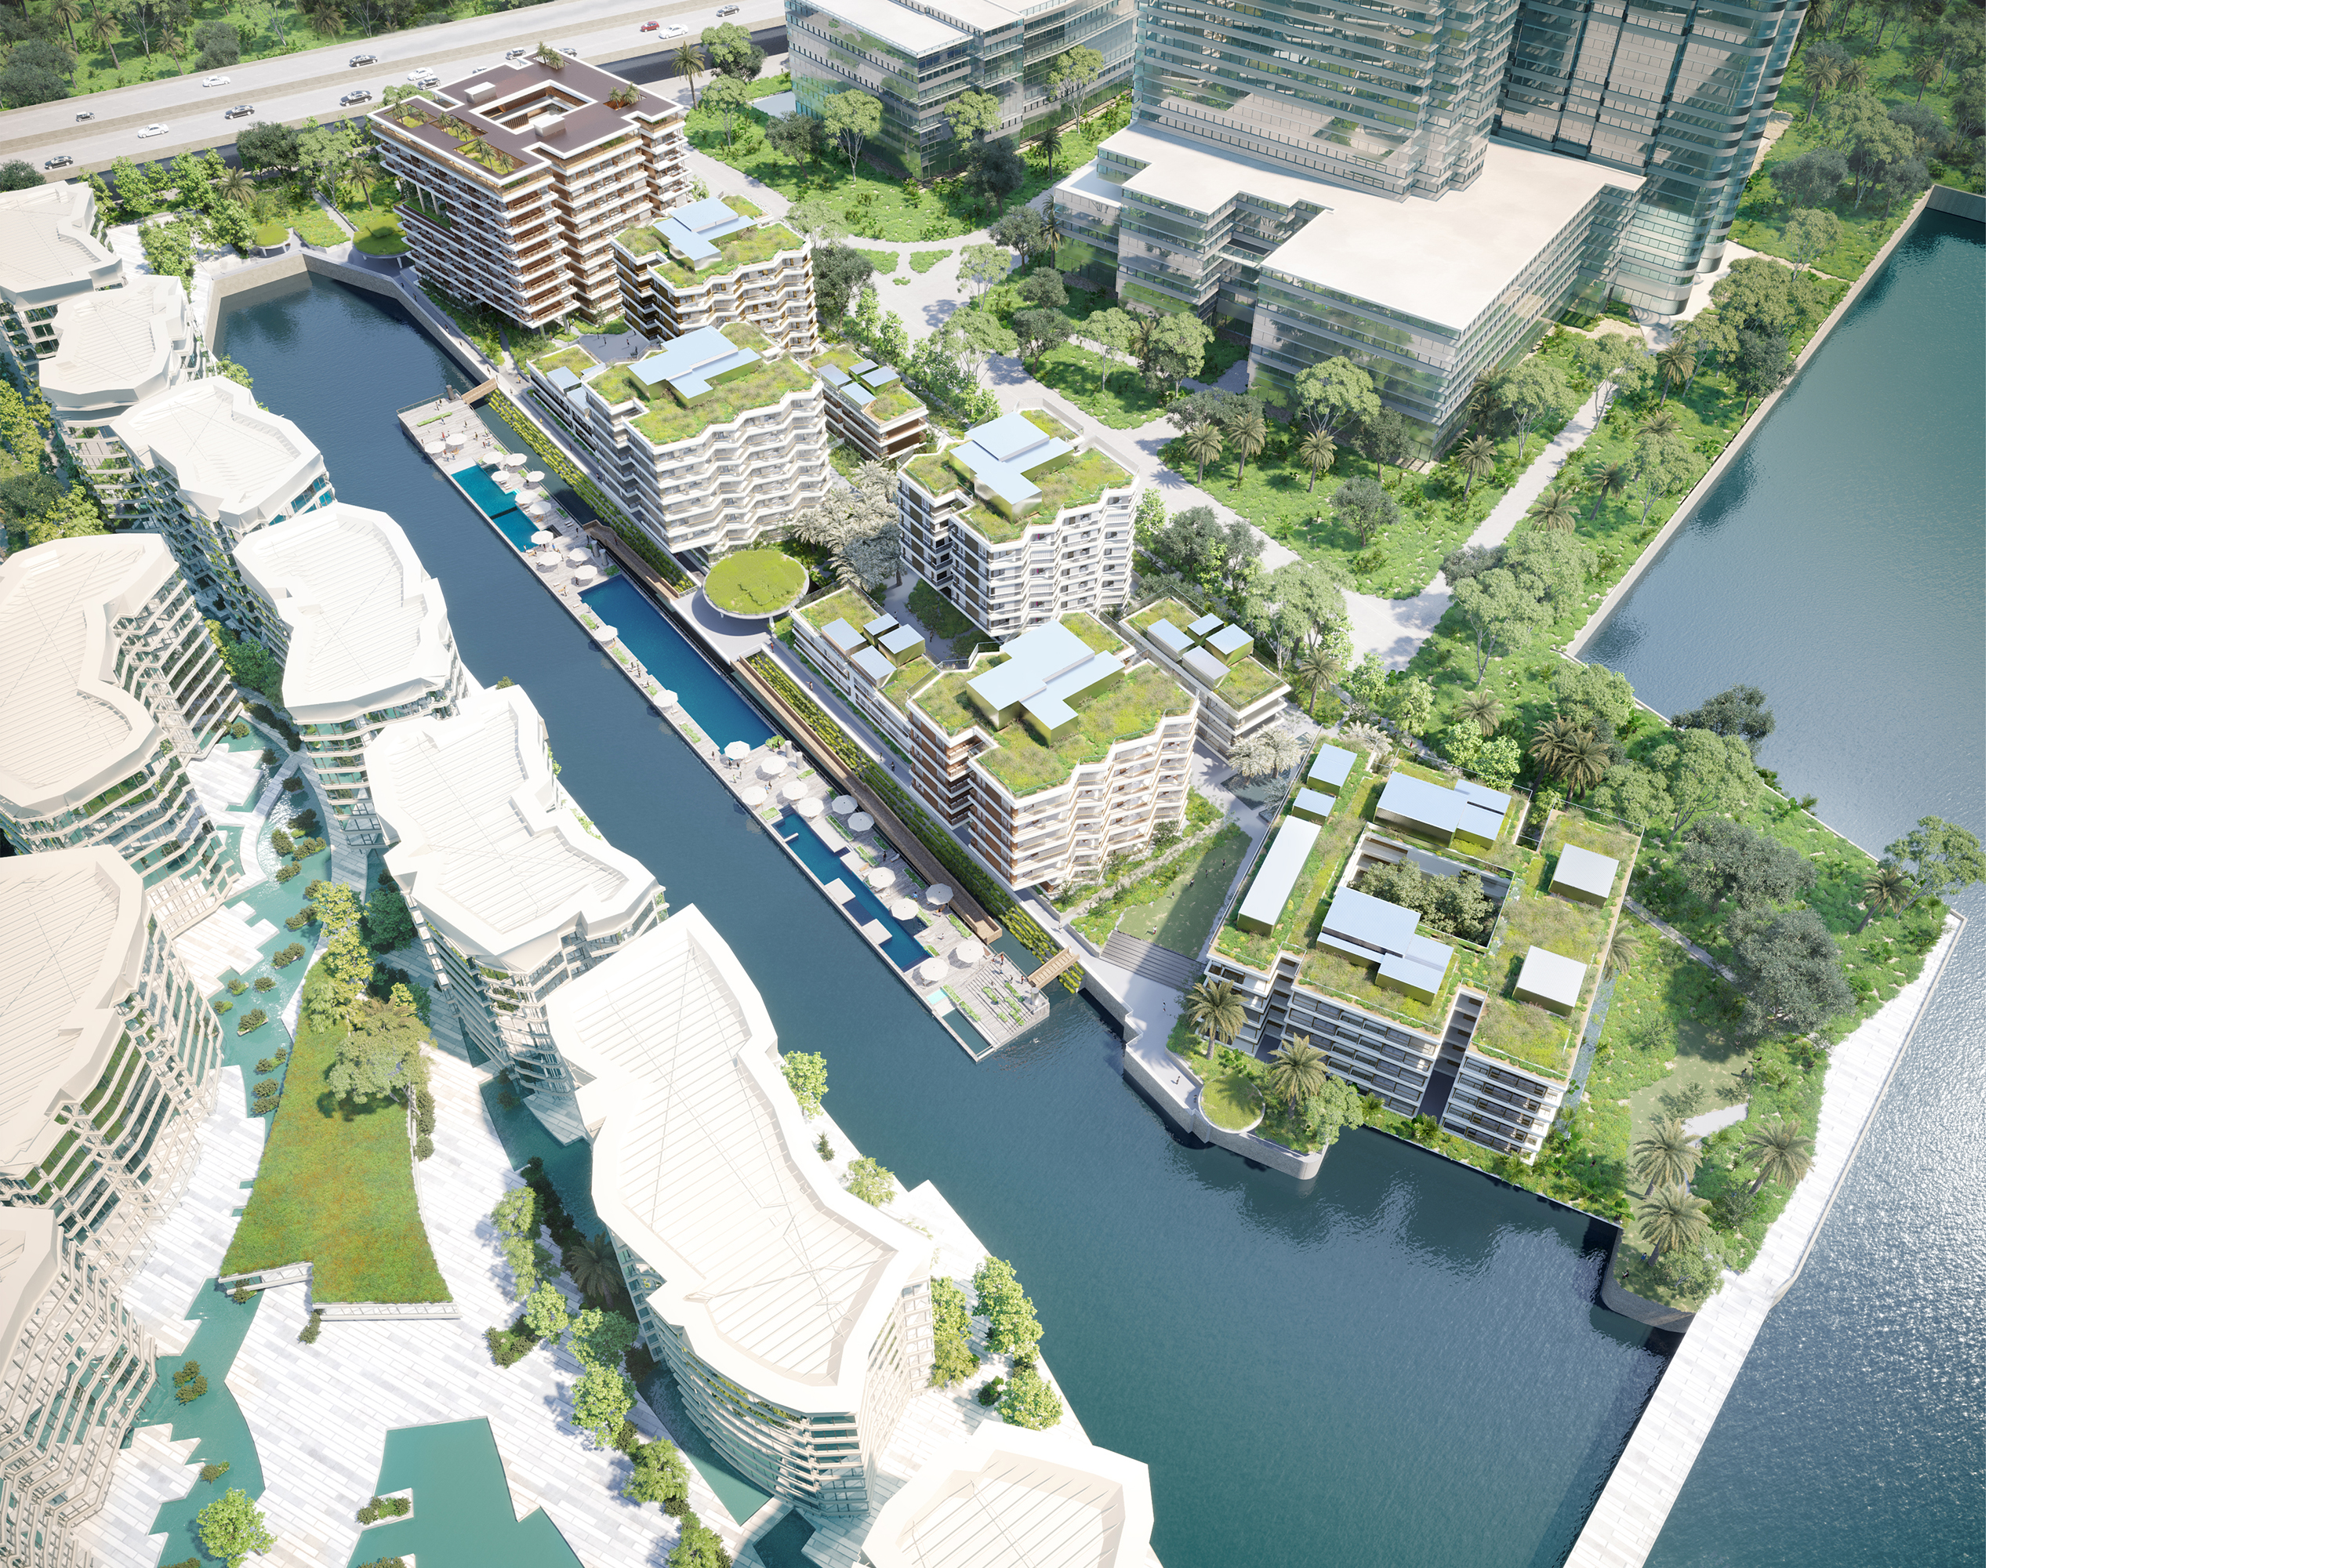 KCAP designed The Reef at King’s Dock in Singapore